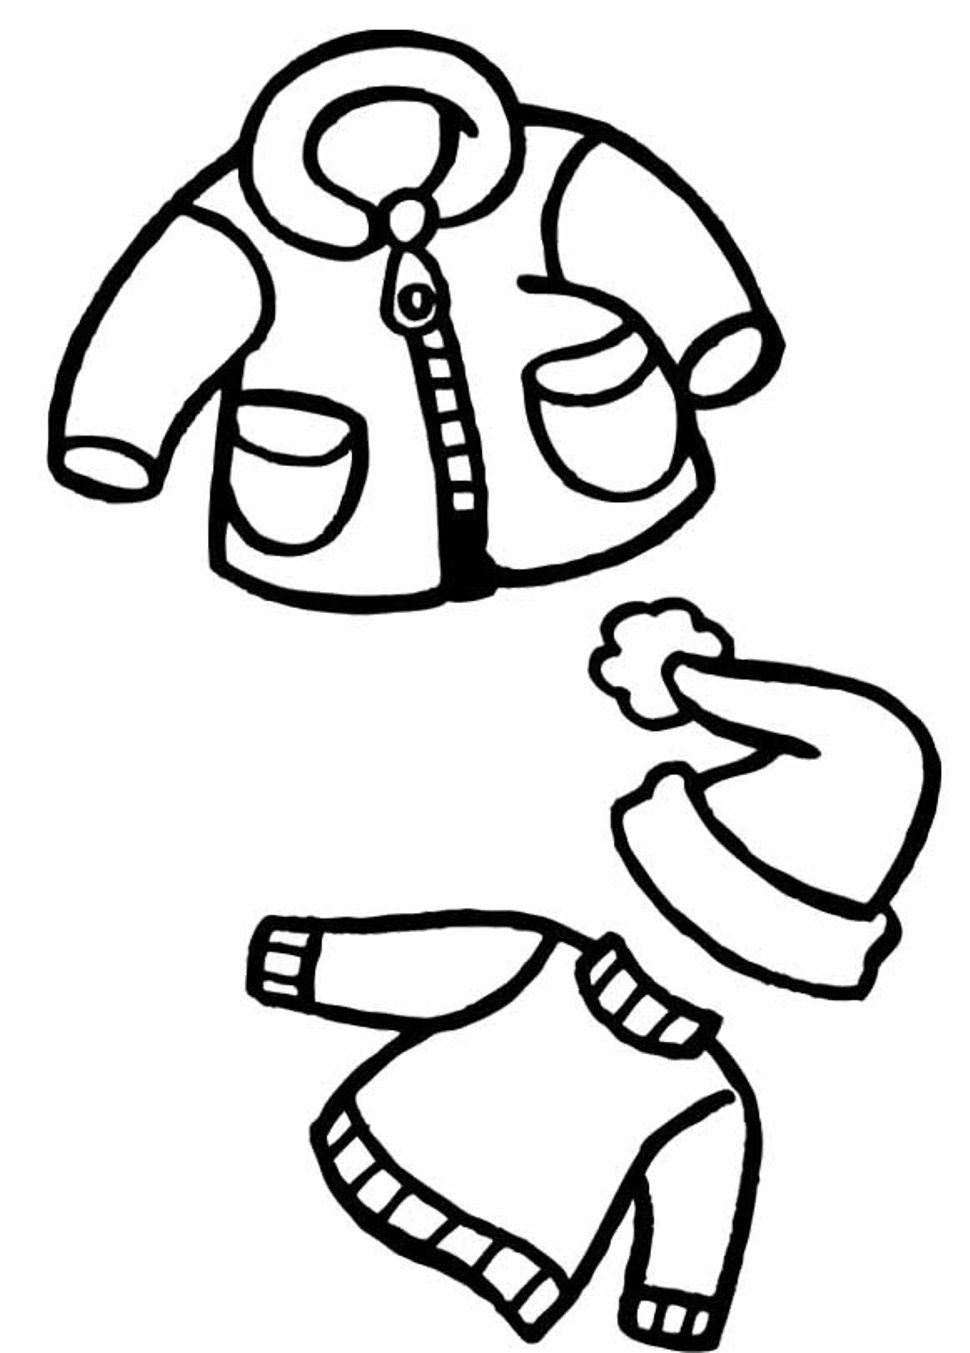 Clothes Winter Coloring Pages | Winter Coloring pages of ...